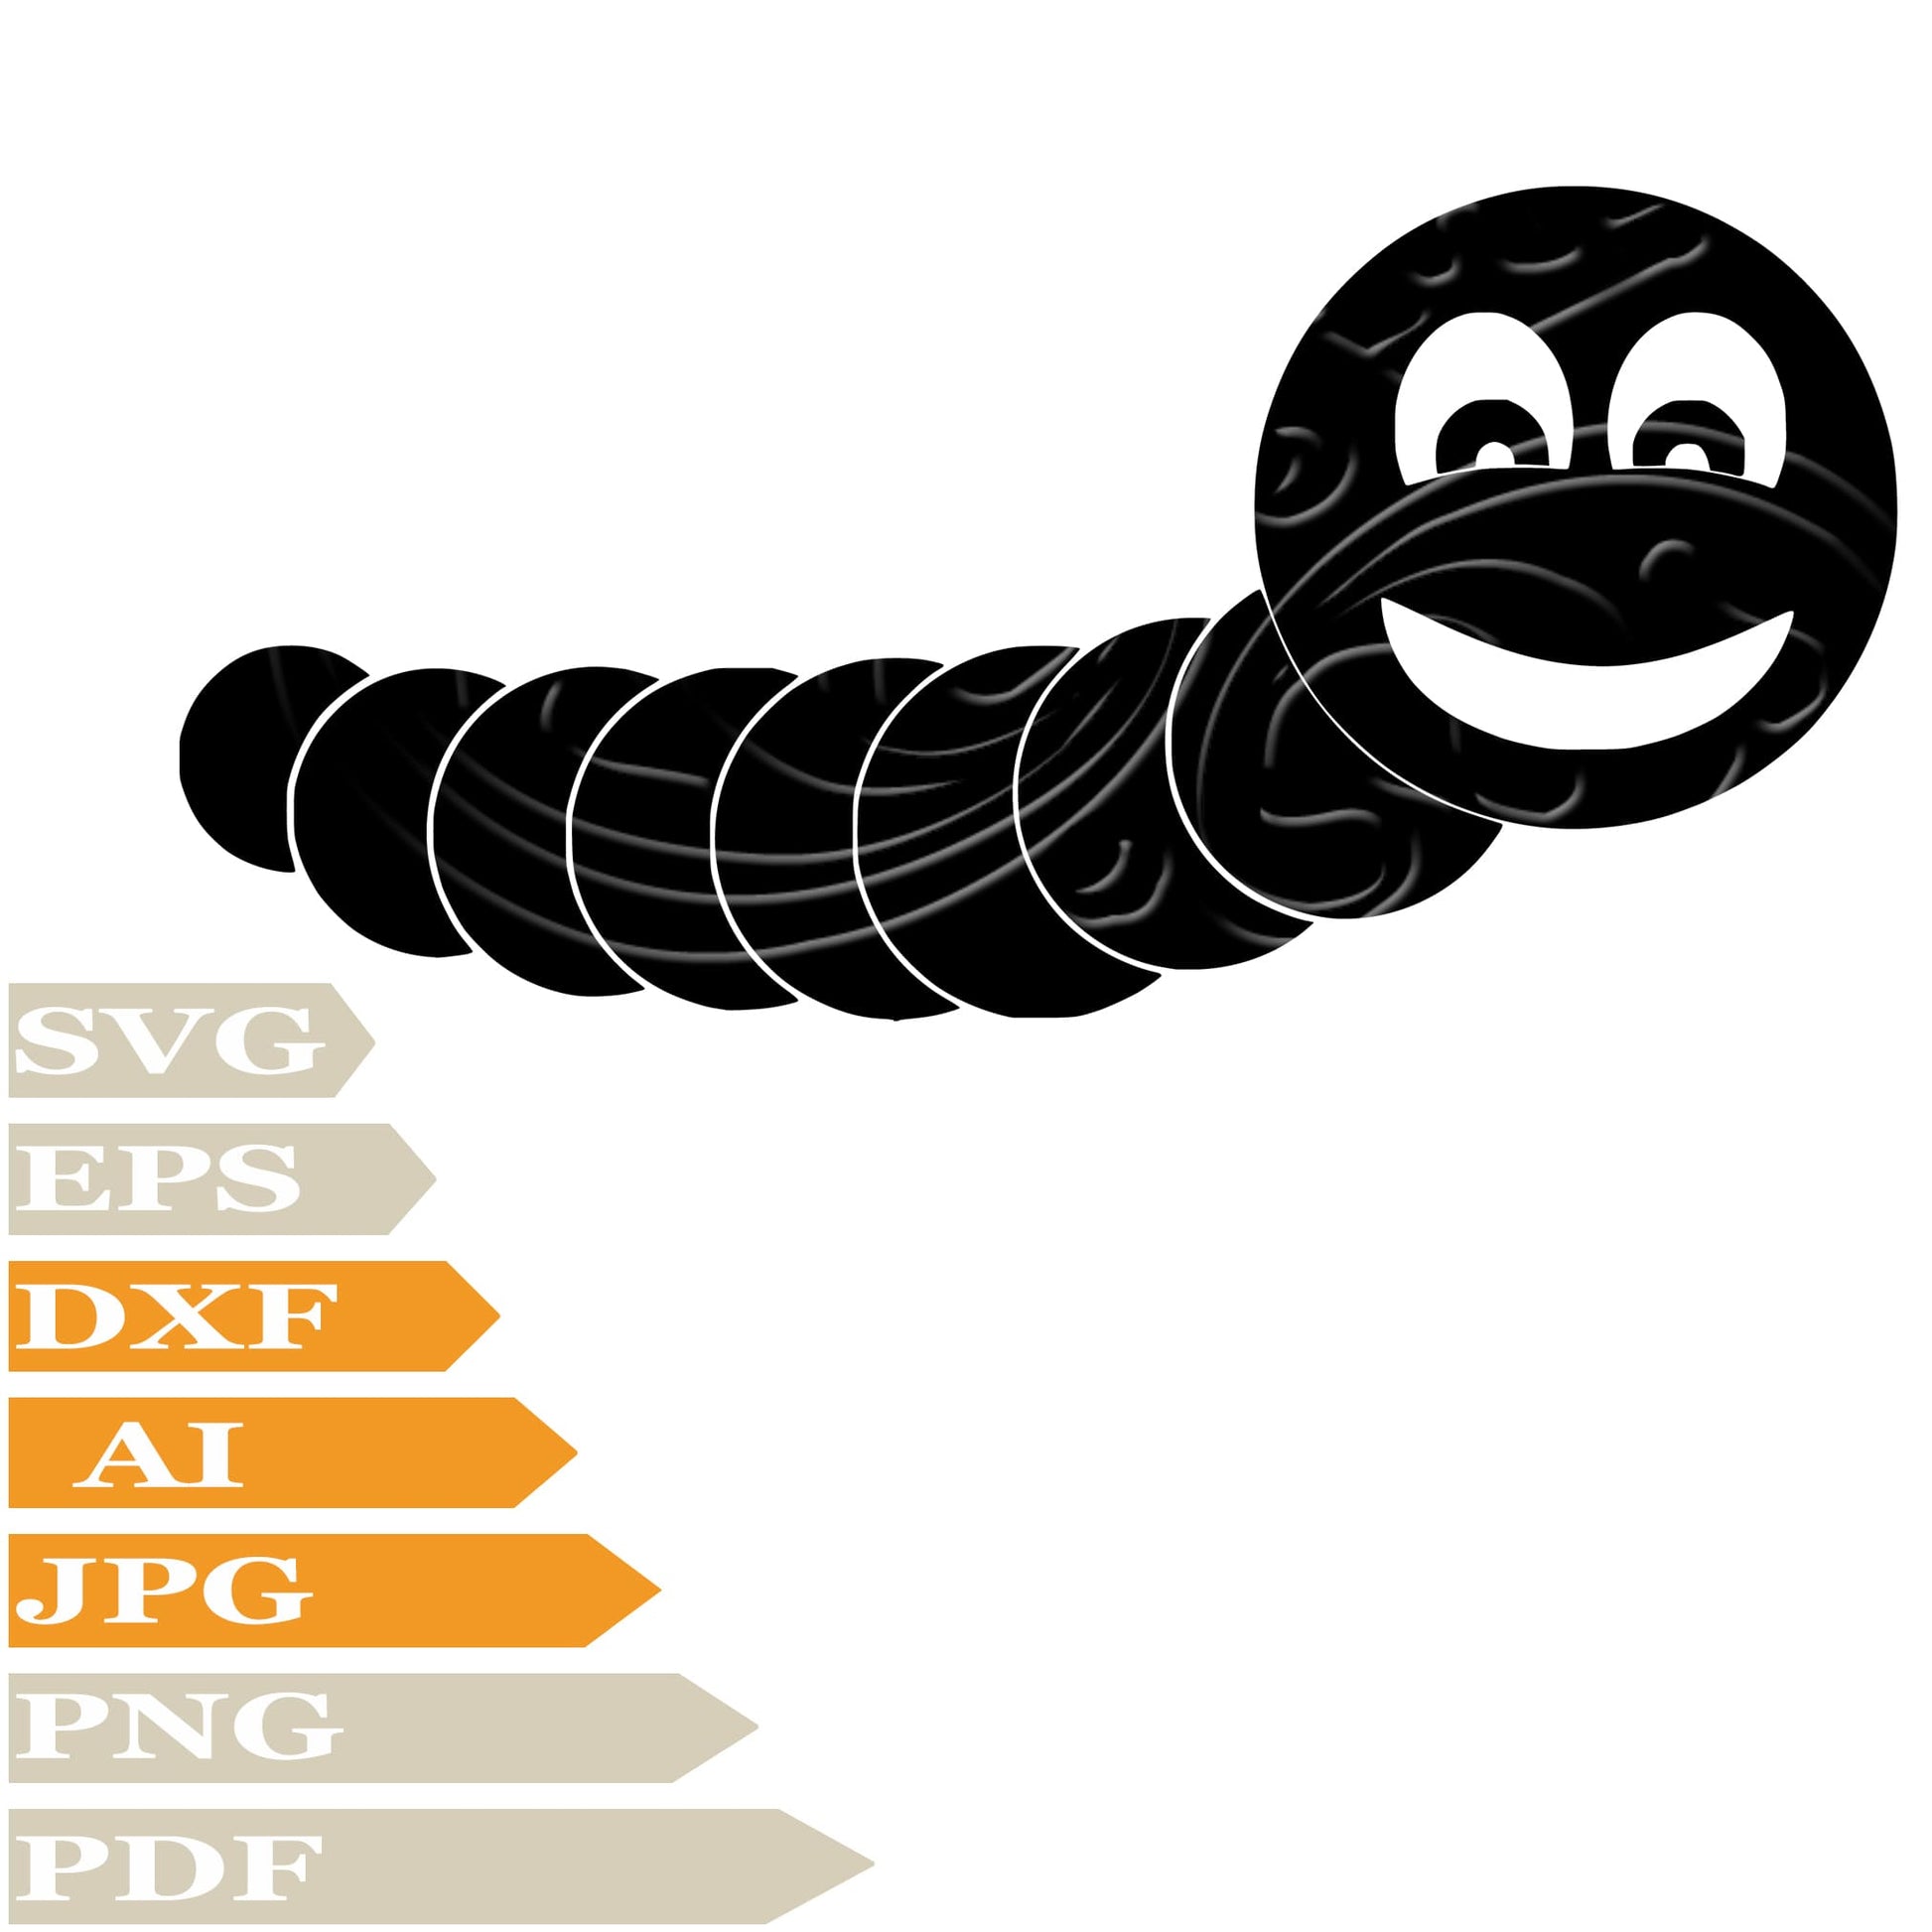 Worm, Funny Face Worm Svg File, Image Cut, Png, For Tattoo, Silhouette, Digital Vector Download, Cut File, Clipart, For Cricut